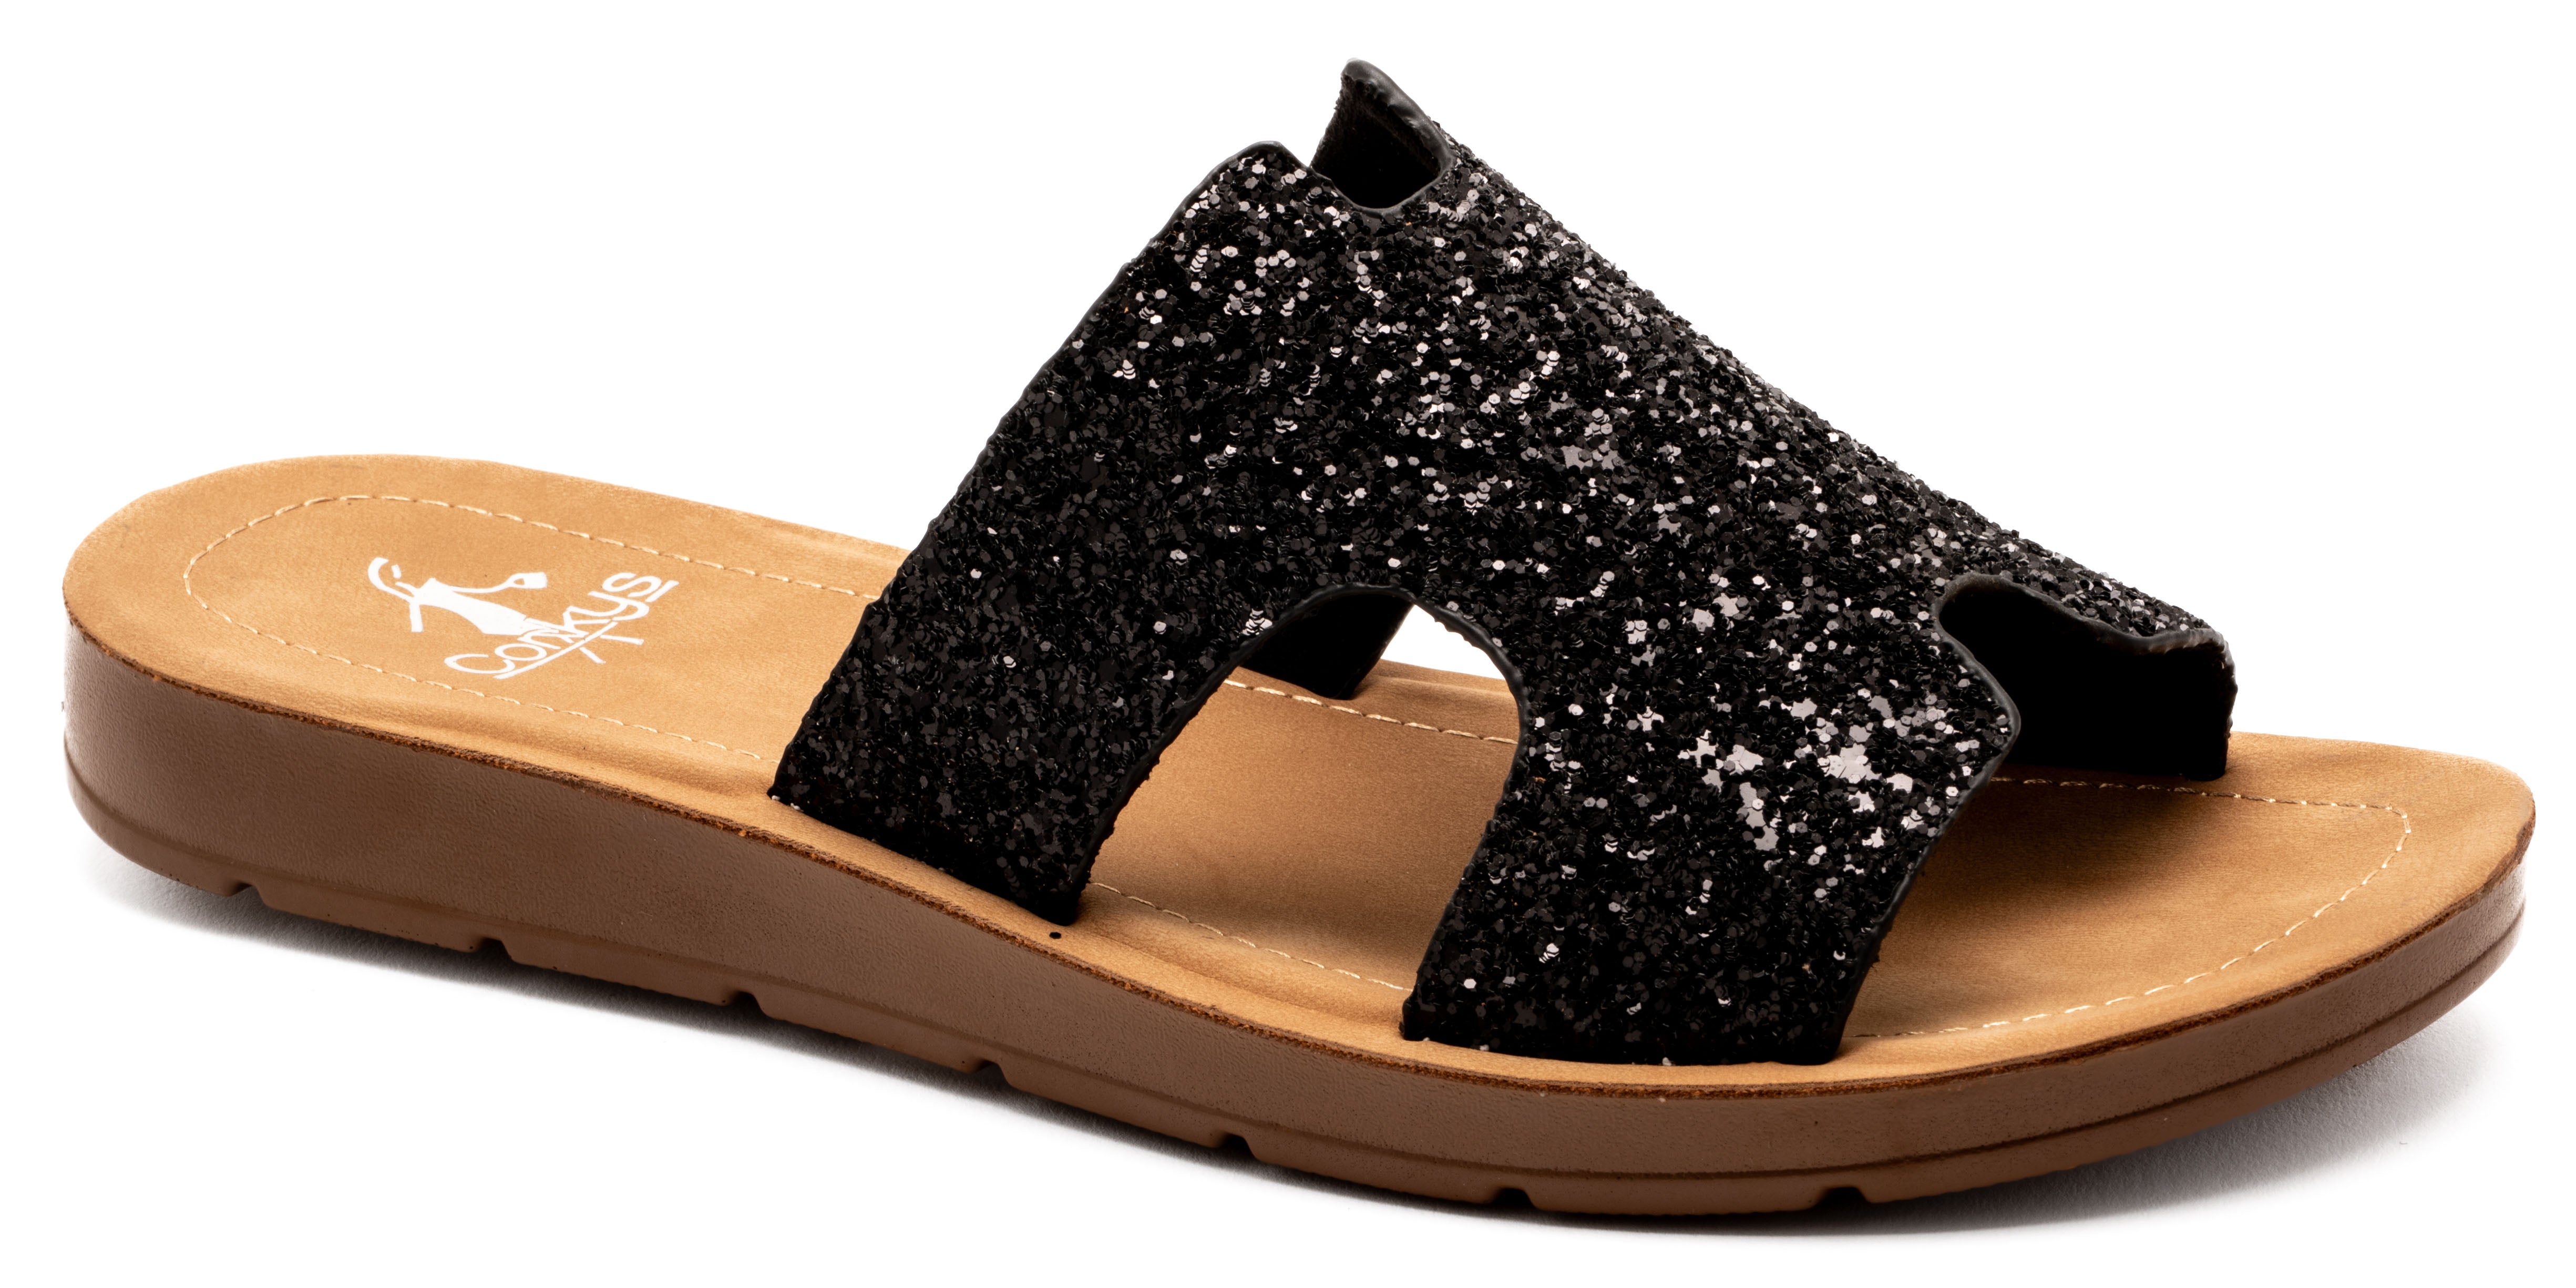 Market Live Preorder: Bogalusa Sandal by Corky’s (Ships in 2-3 Weeks)